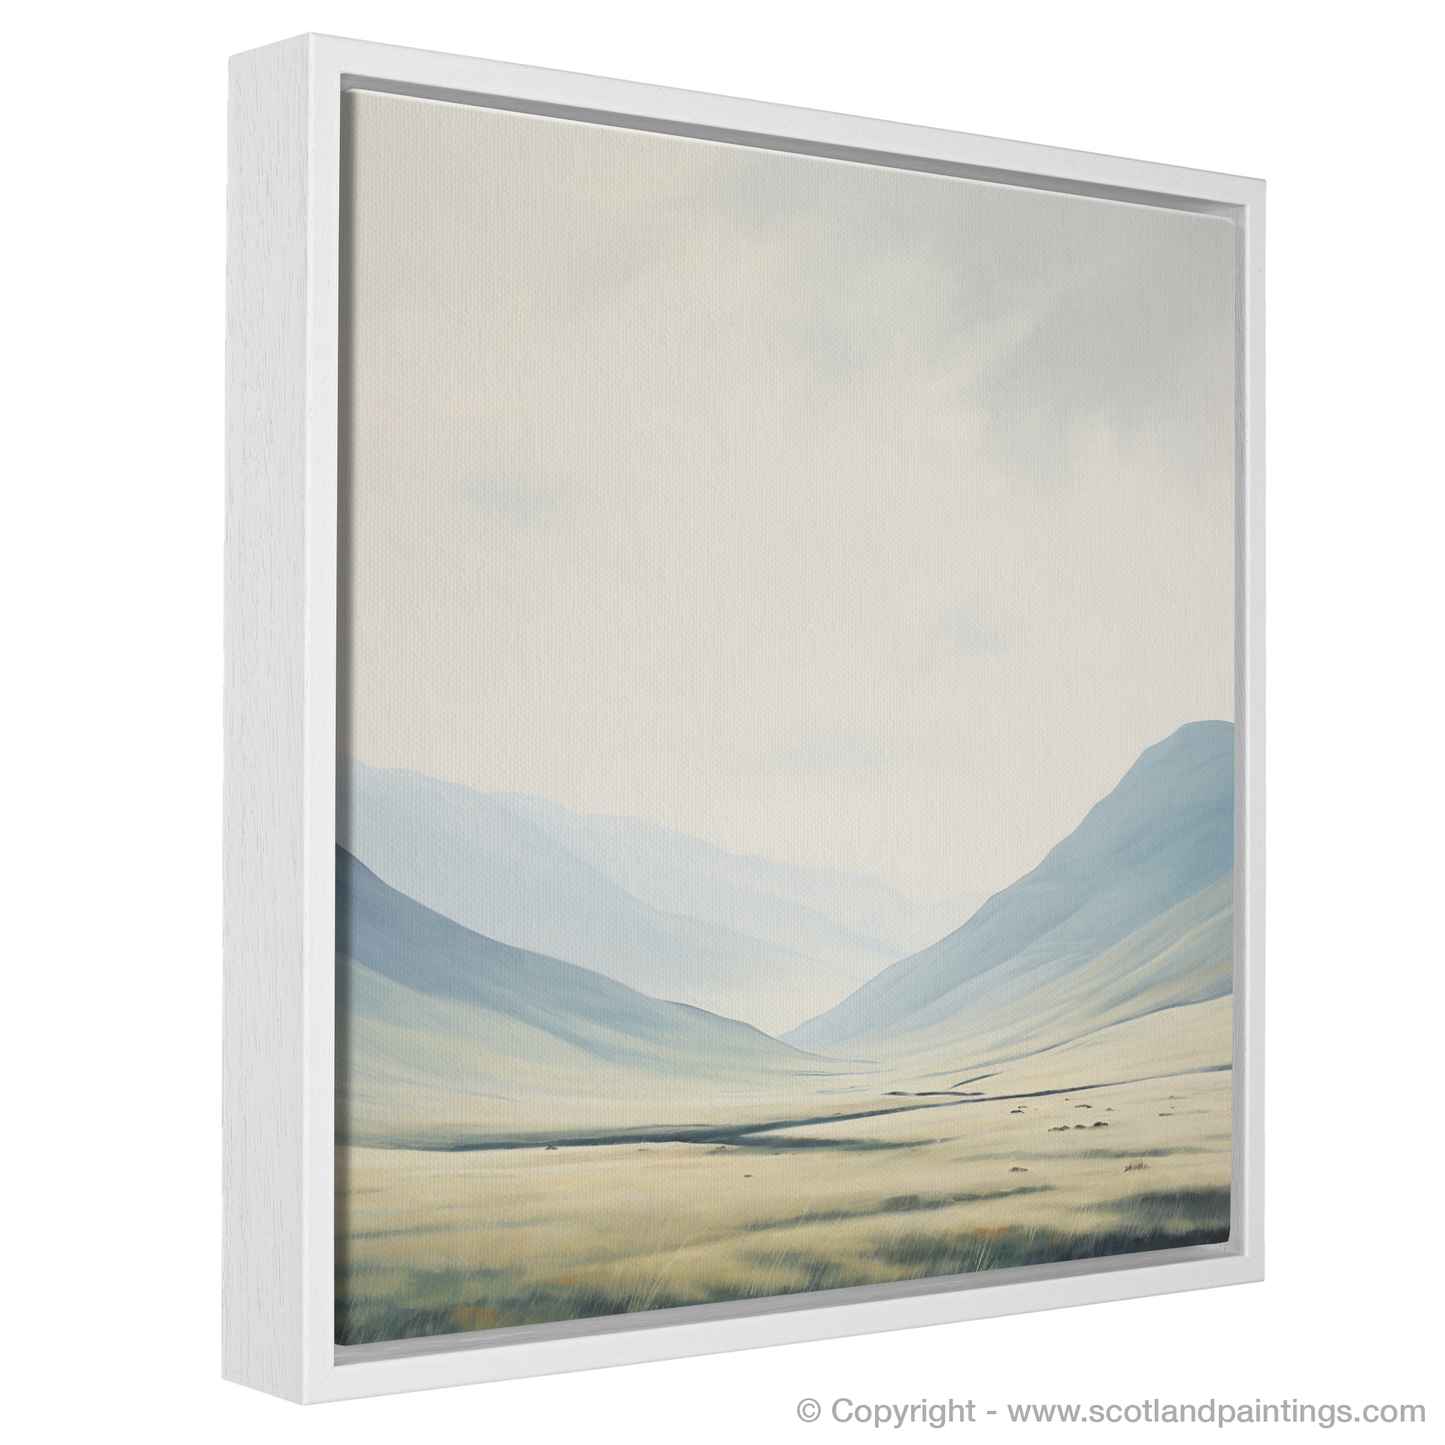 Painting and Art Print of The Cairnwell entitled "The Cairnwell Whispers: An Abstract Highland Symphony".